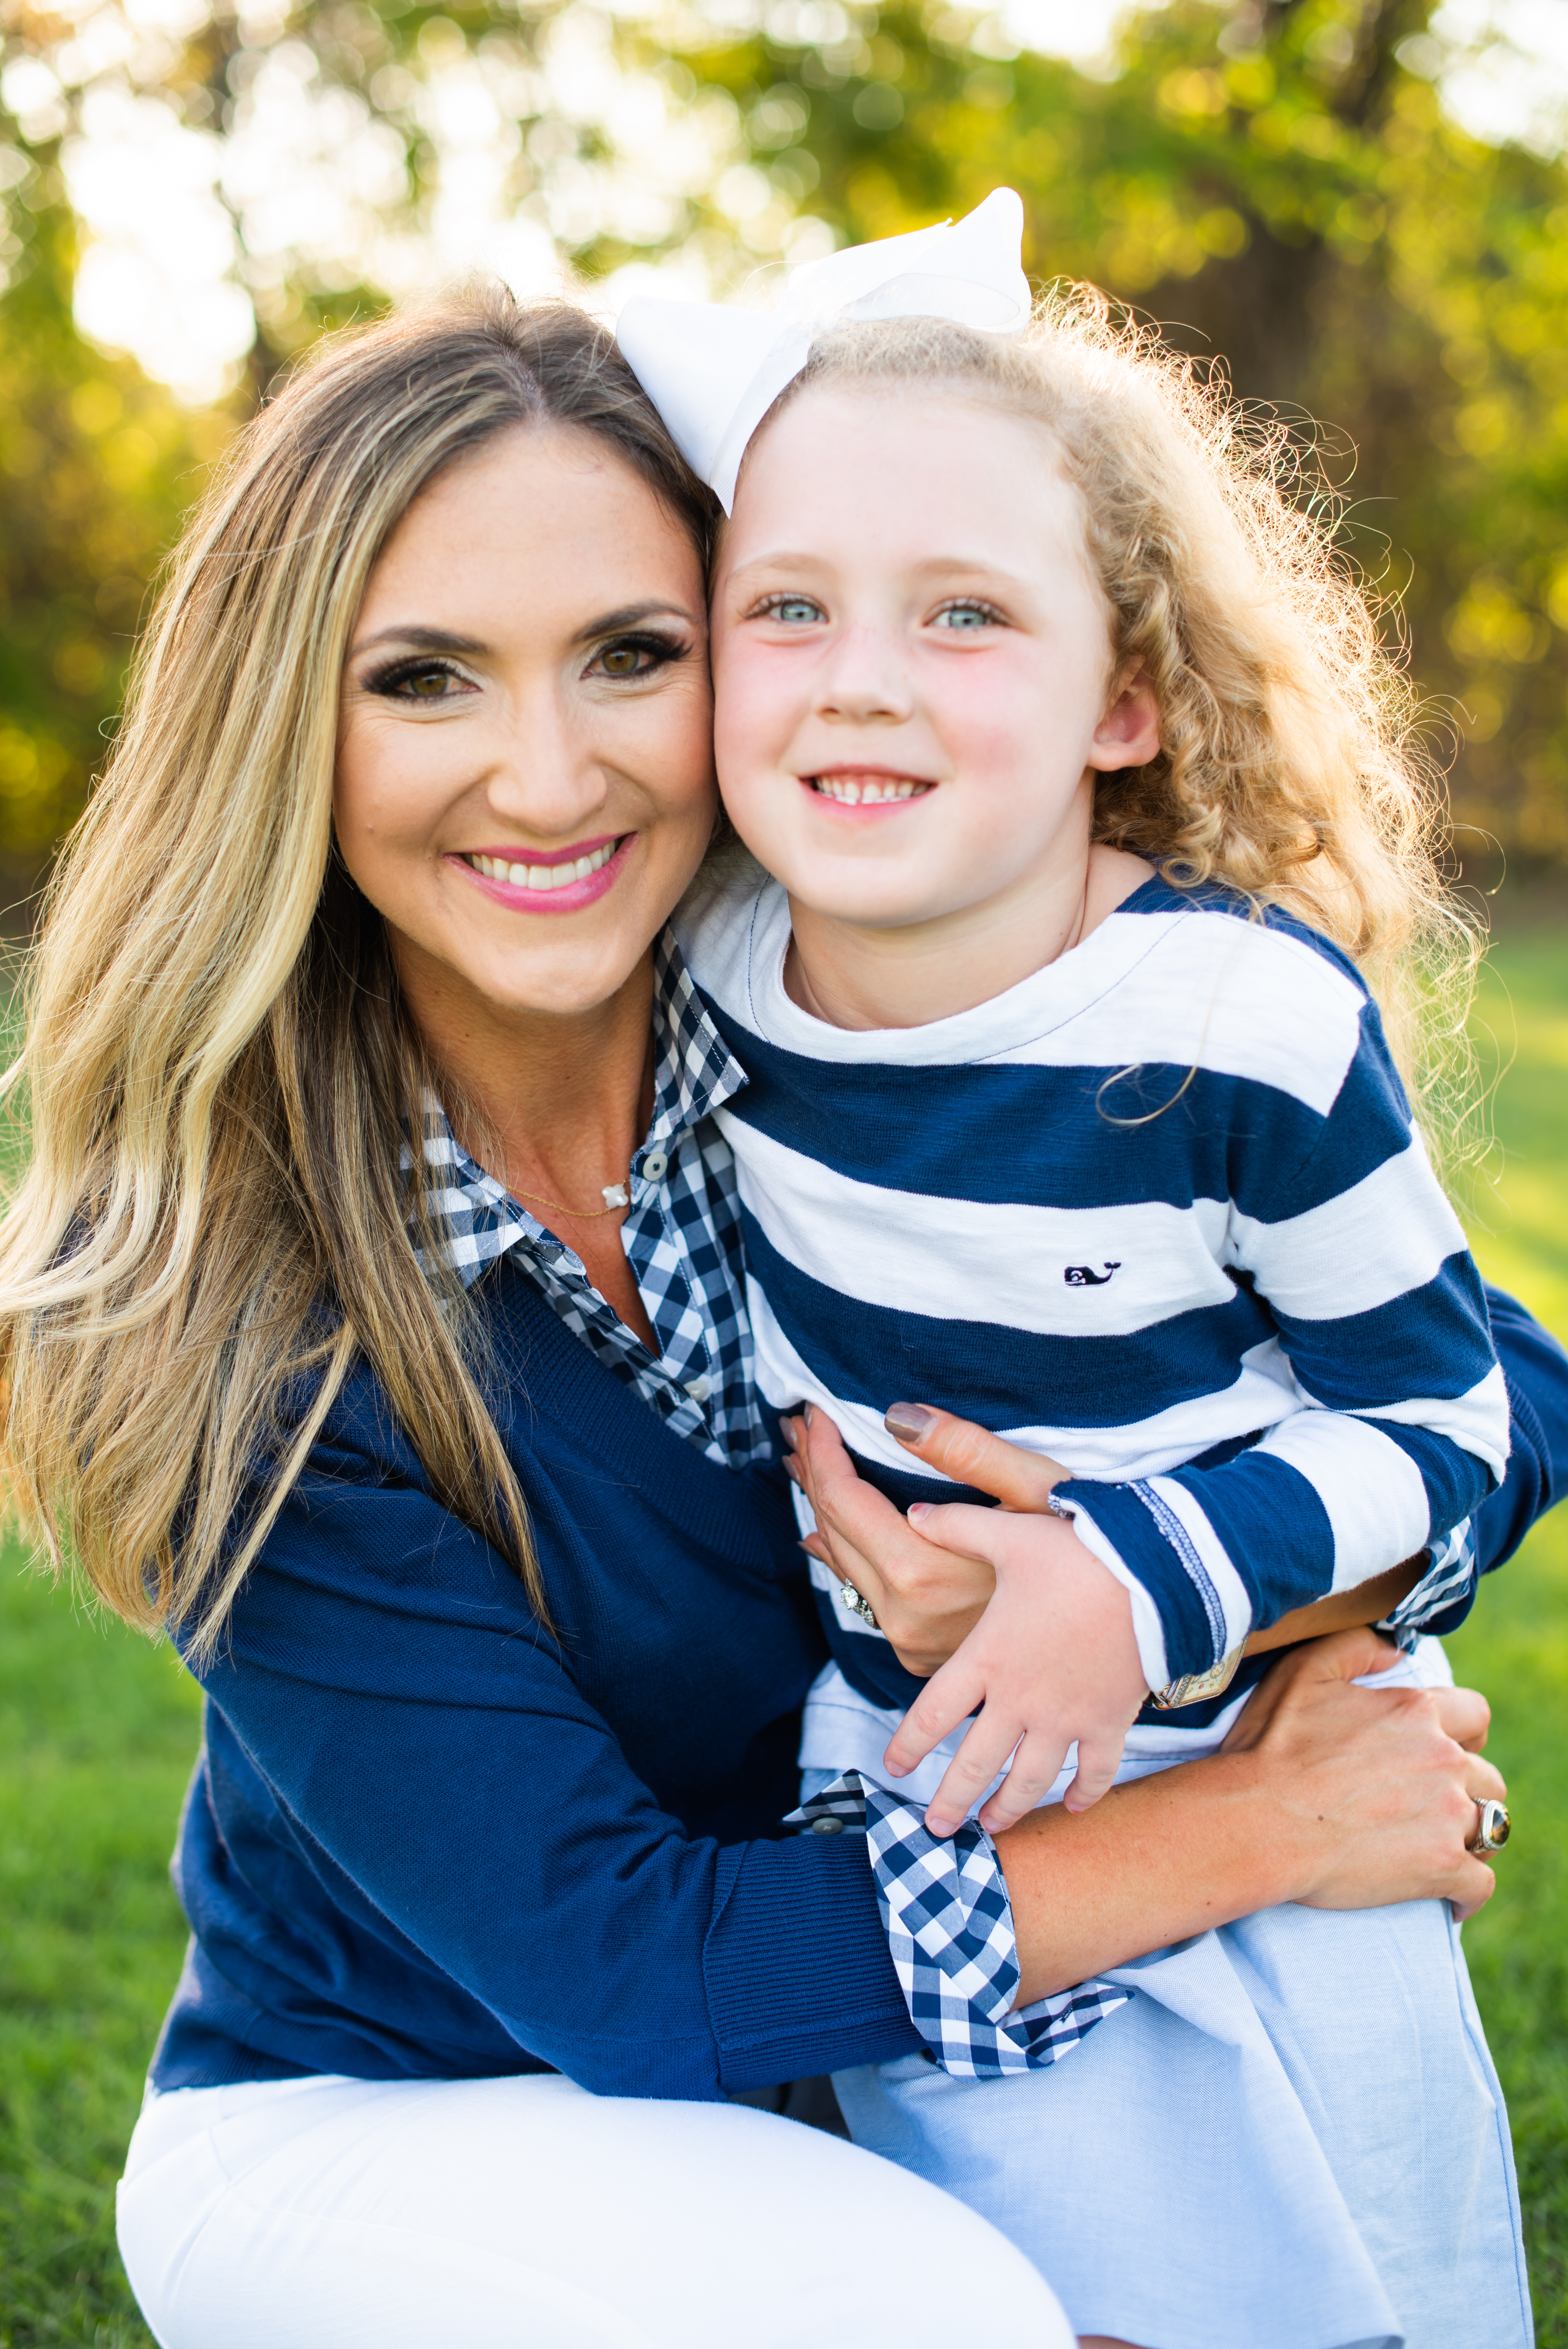 Vineyard Vines | What to Wear for Family Pictures this Fall | Tips, Tricks and Outfit Suggestions! featured by popular Dallas fashion blogger Style Your Senses